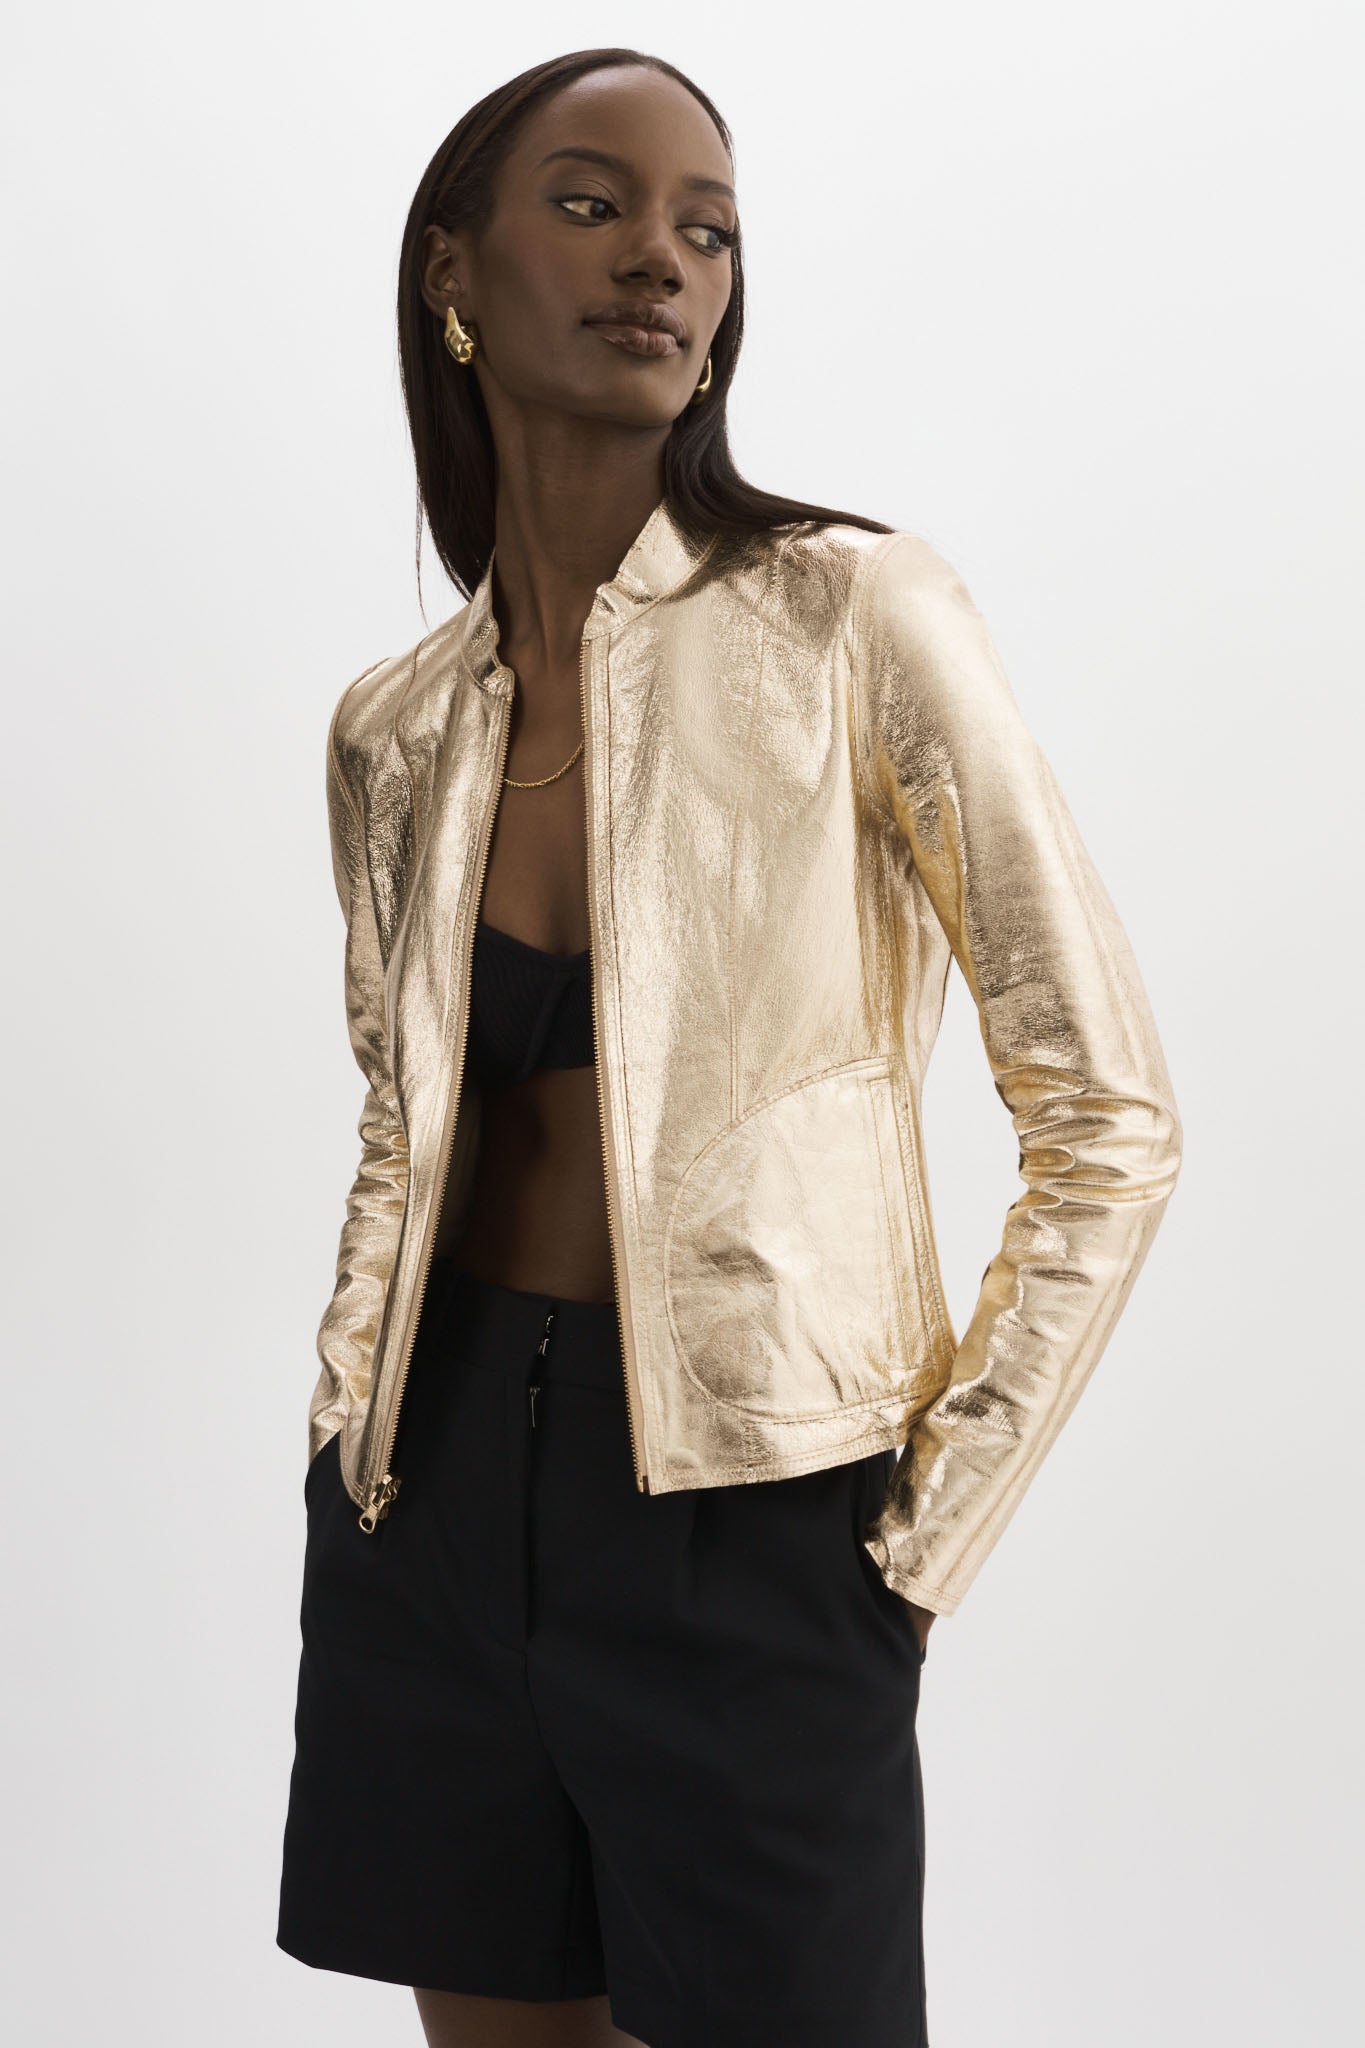 Lamarque Chapin Reversible Leather Bomber S / Wheat & Gold